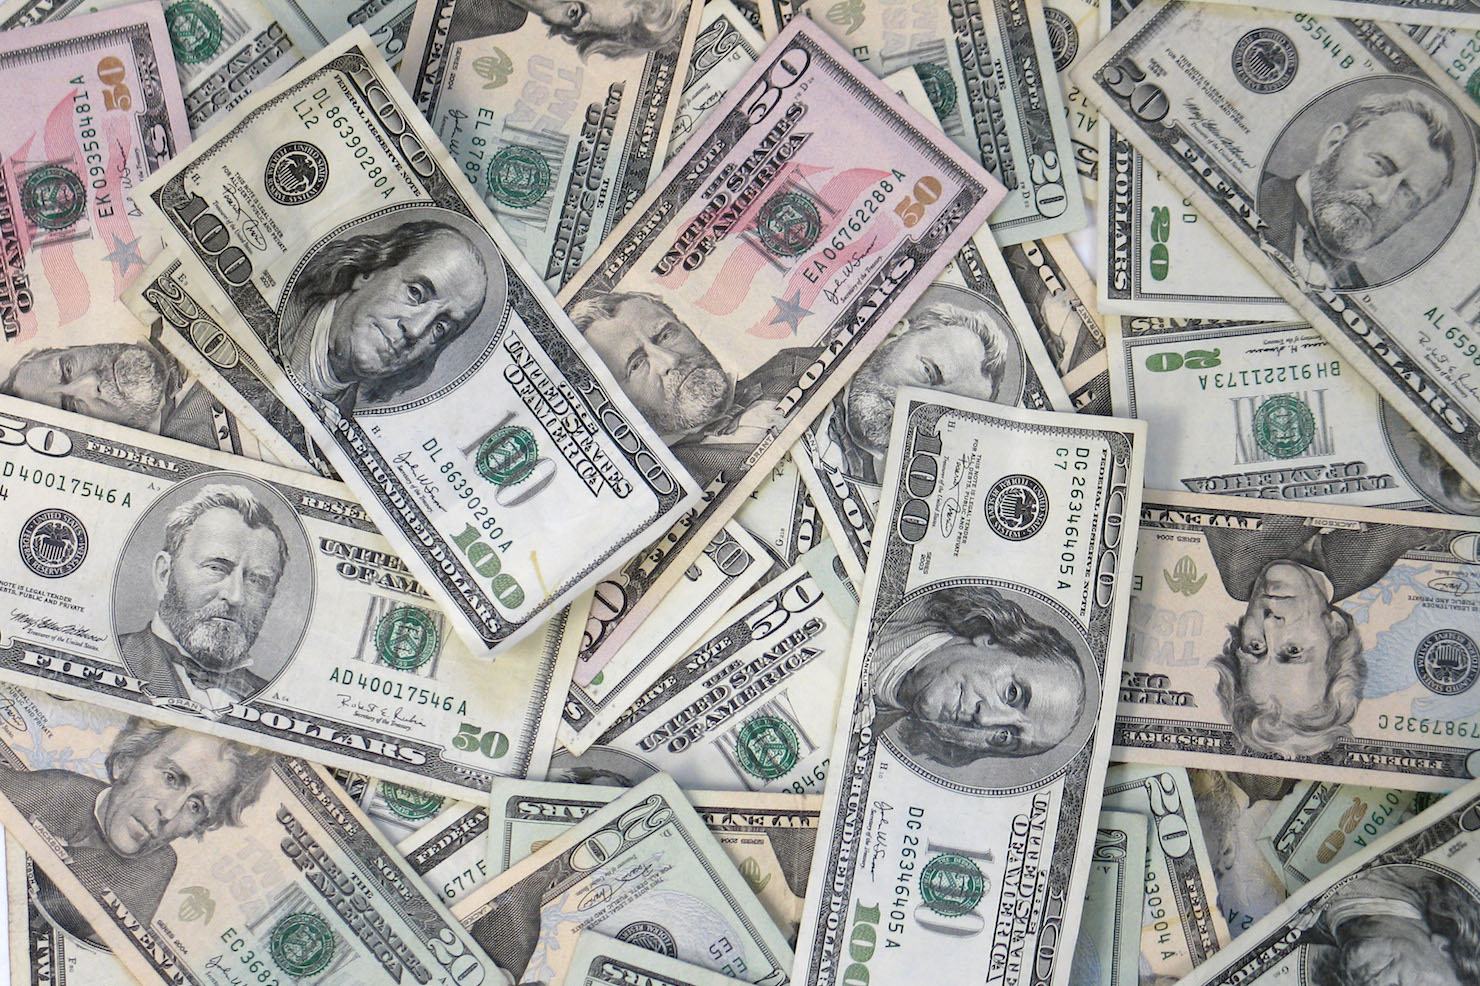 SessionM Snags $35M From General Atlantic, Salesforce, & Others - Pile of money stock image